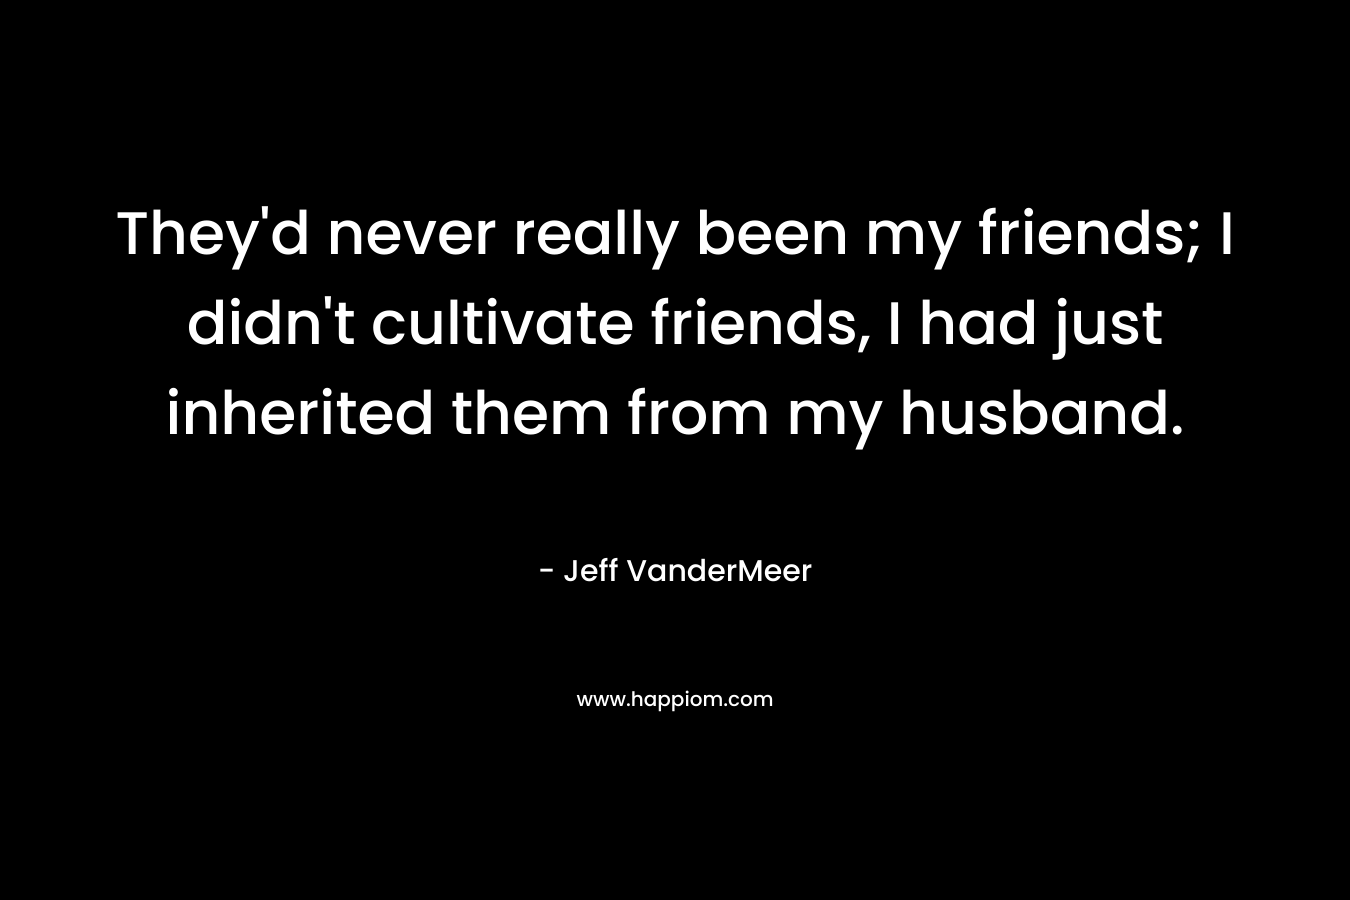 They’d never really been my friends; I didn’t cultivate friends, I had just inherited them from my husband. – Jeff VanderMeer